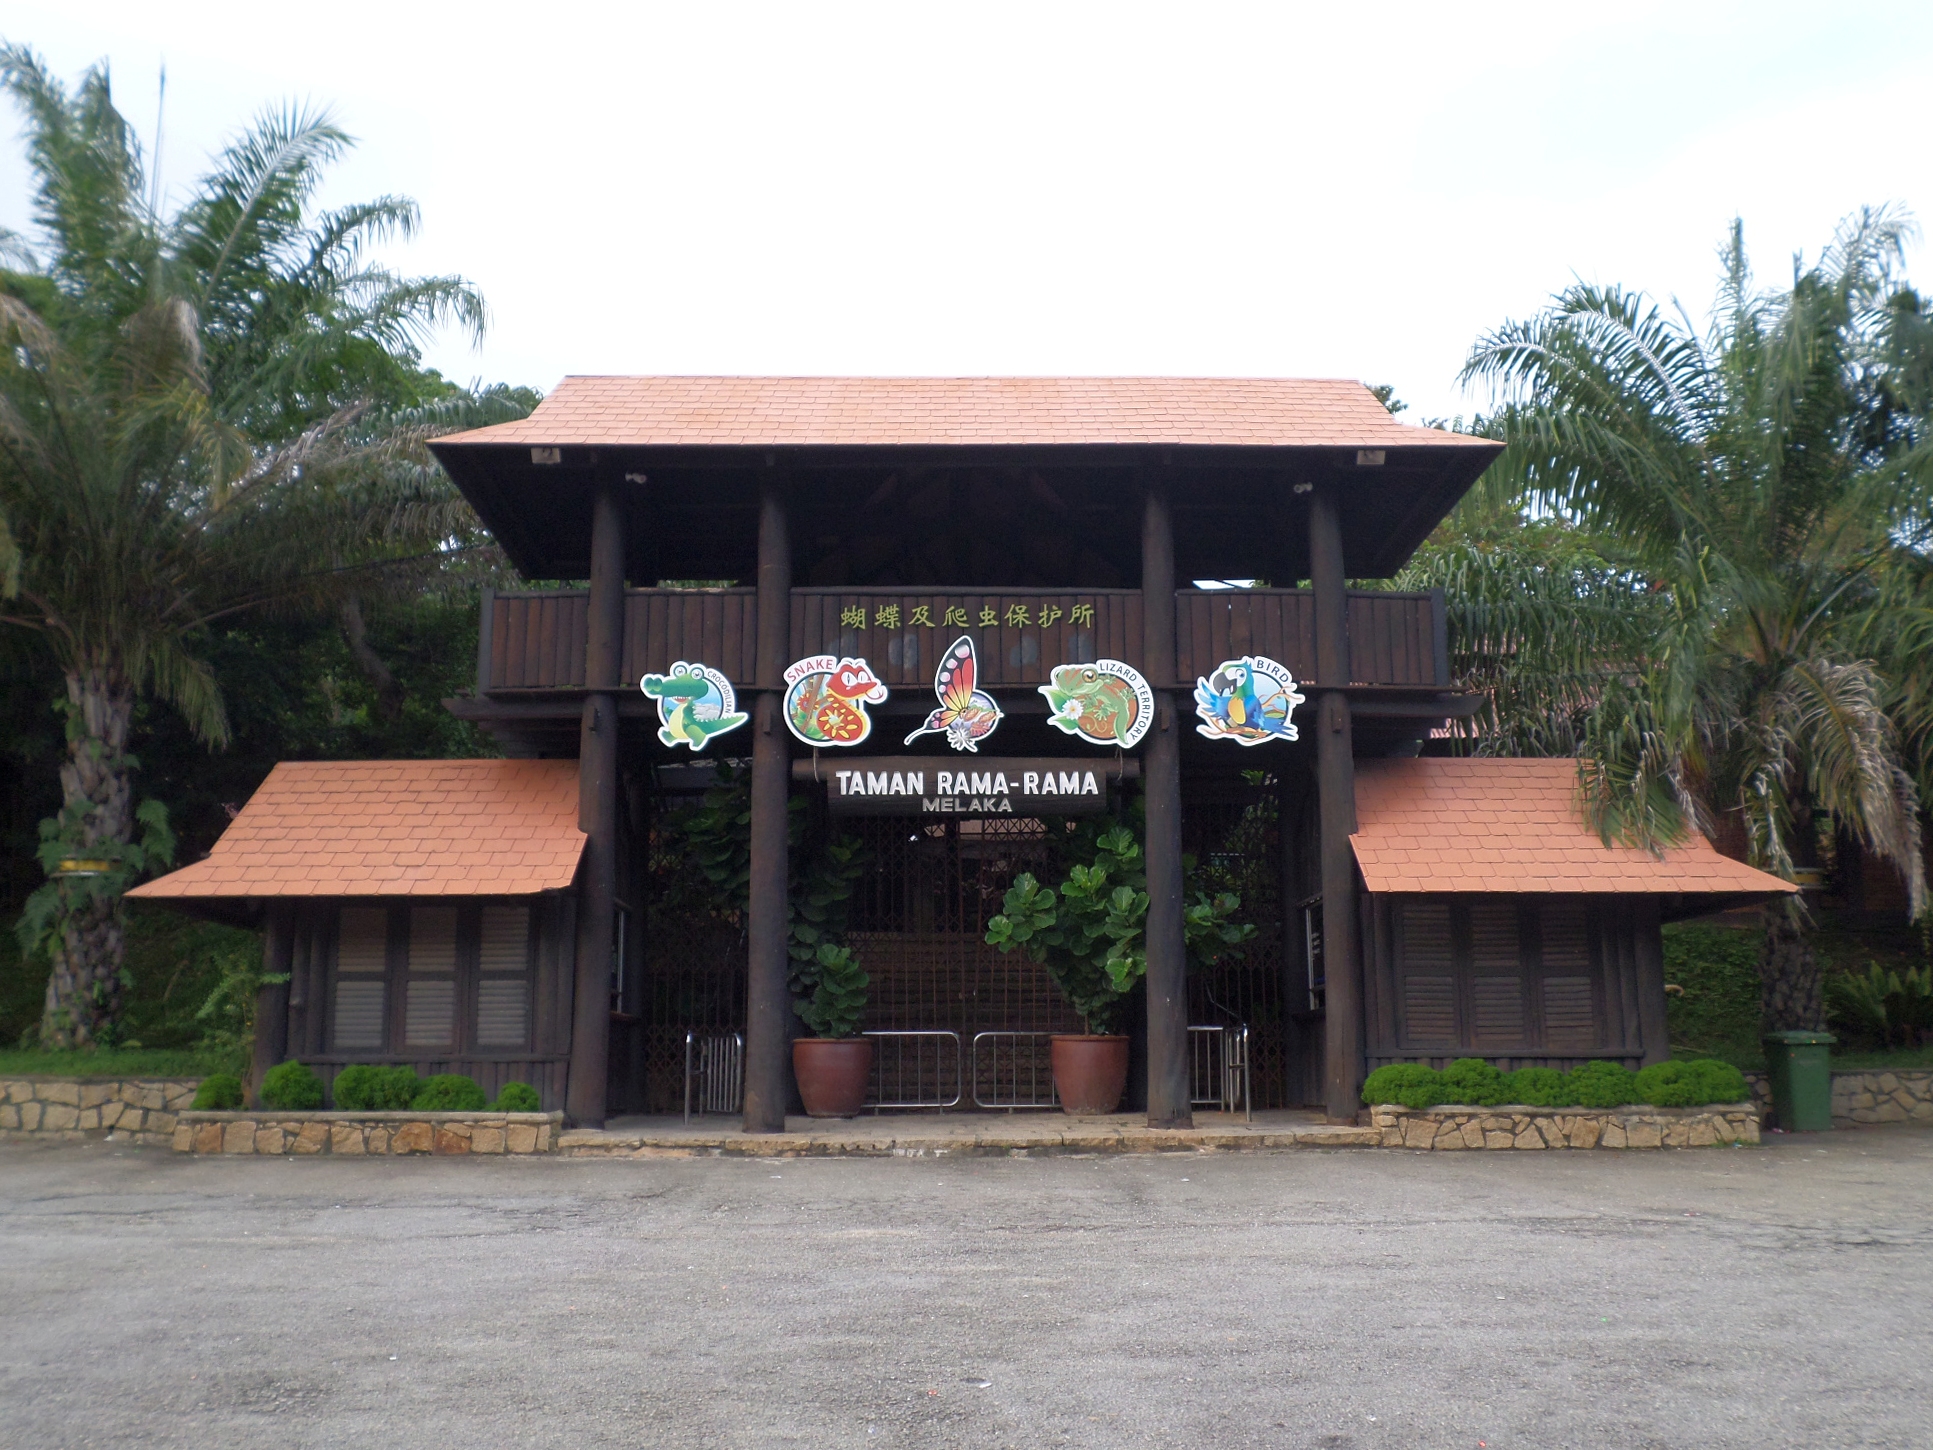 Explore the Malacca Butterfly and Reptile Sanctuary